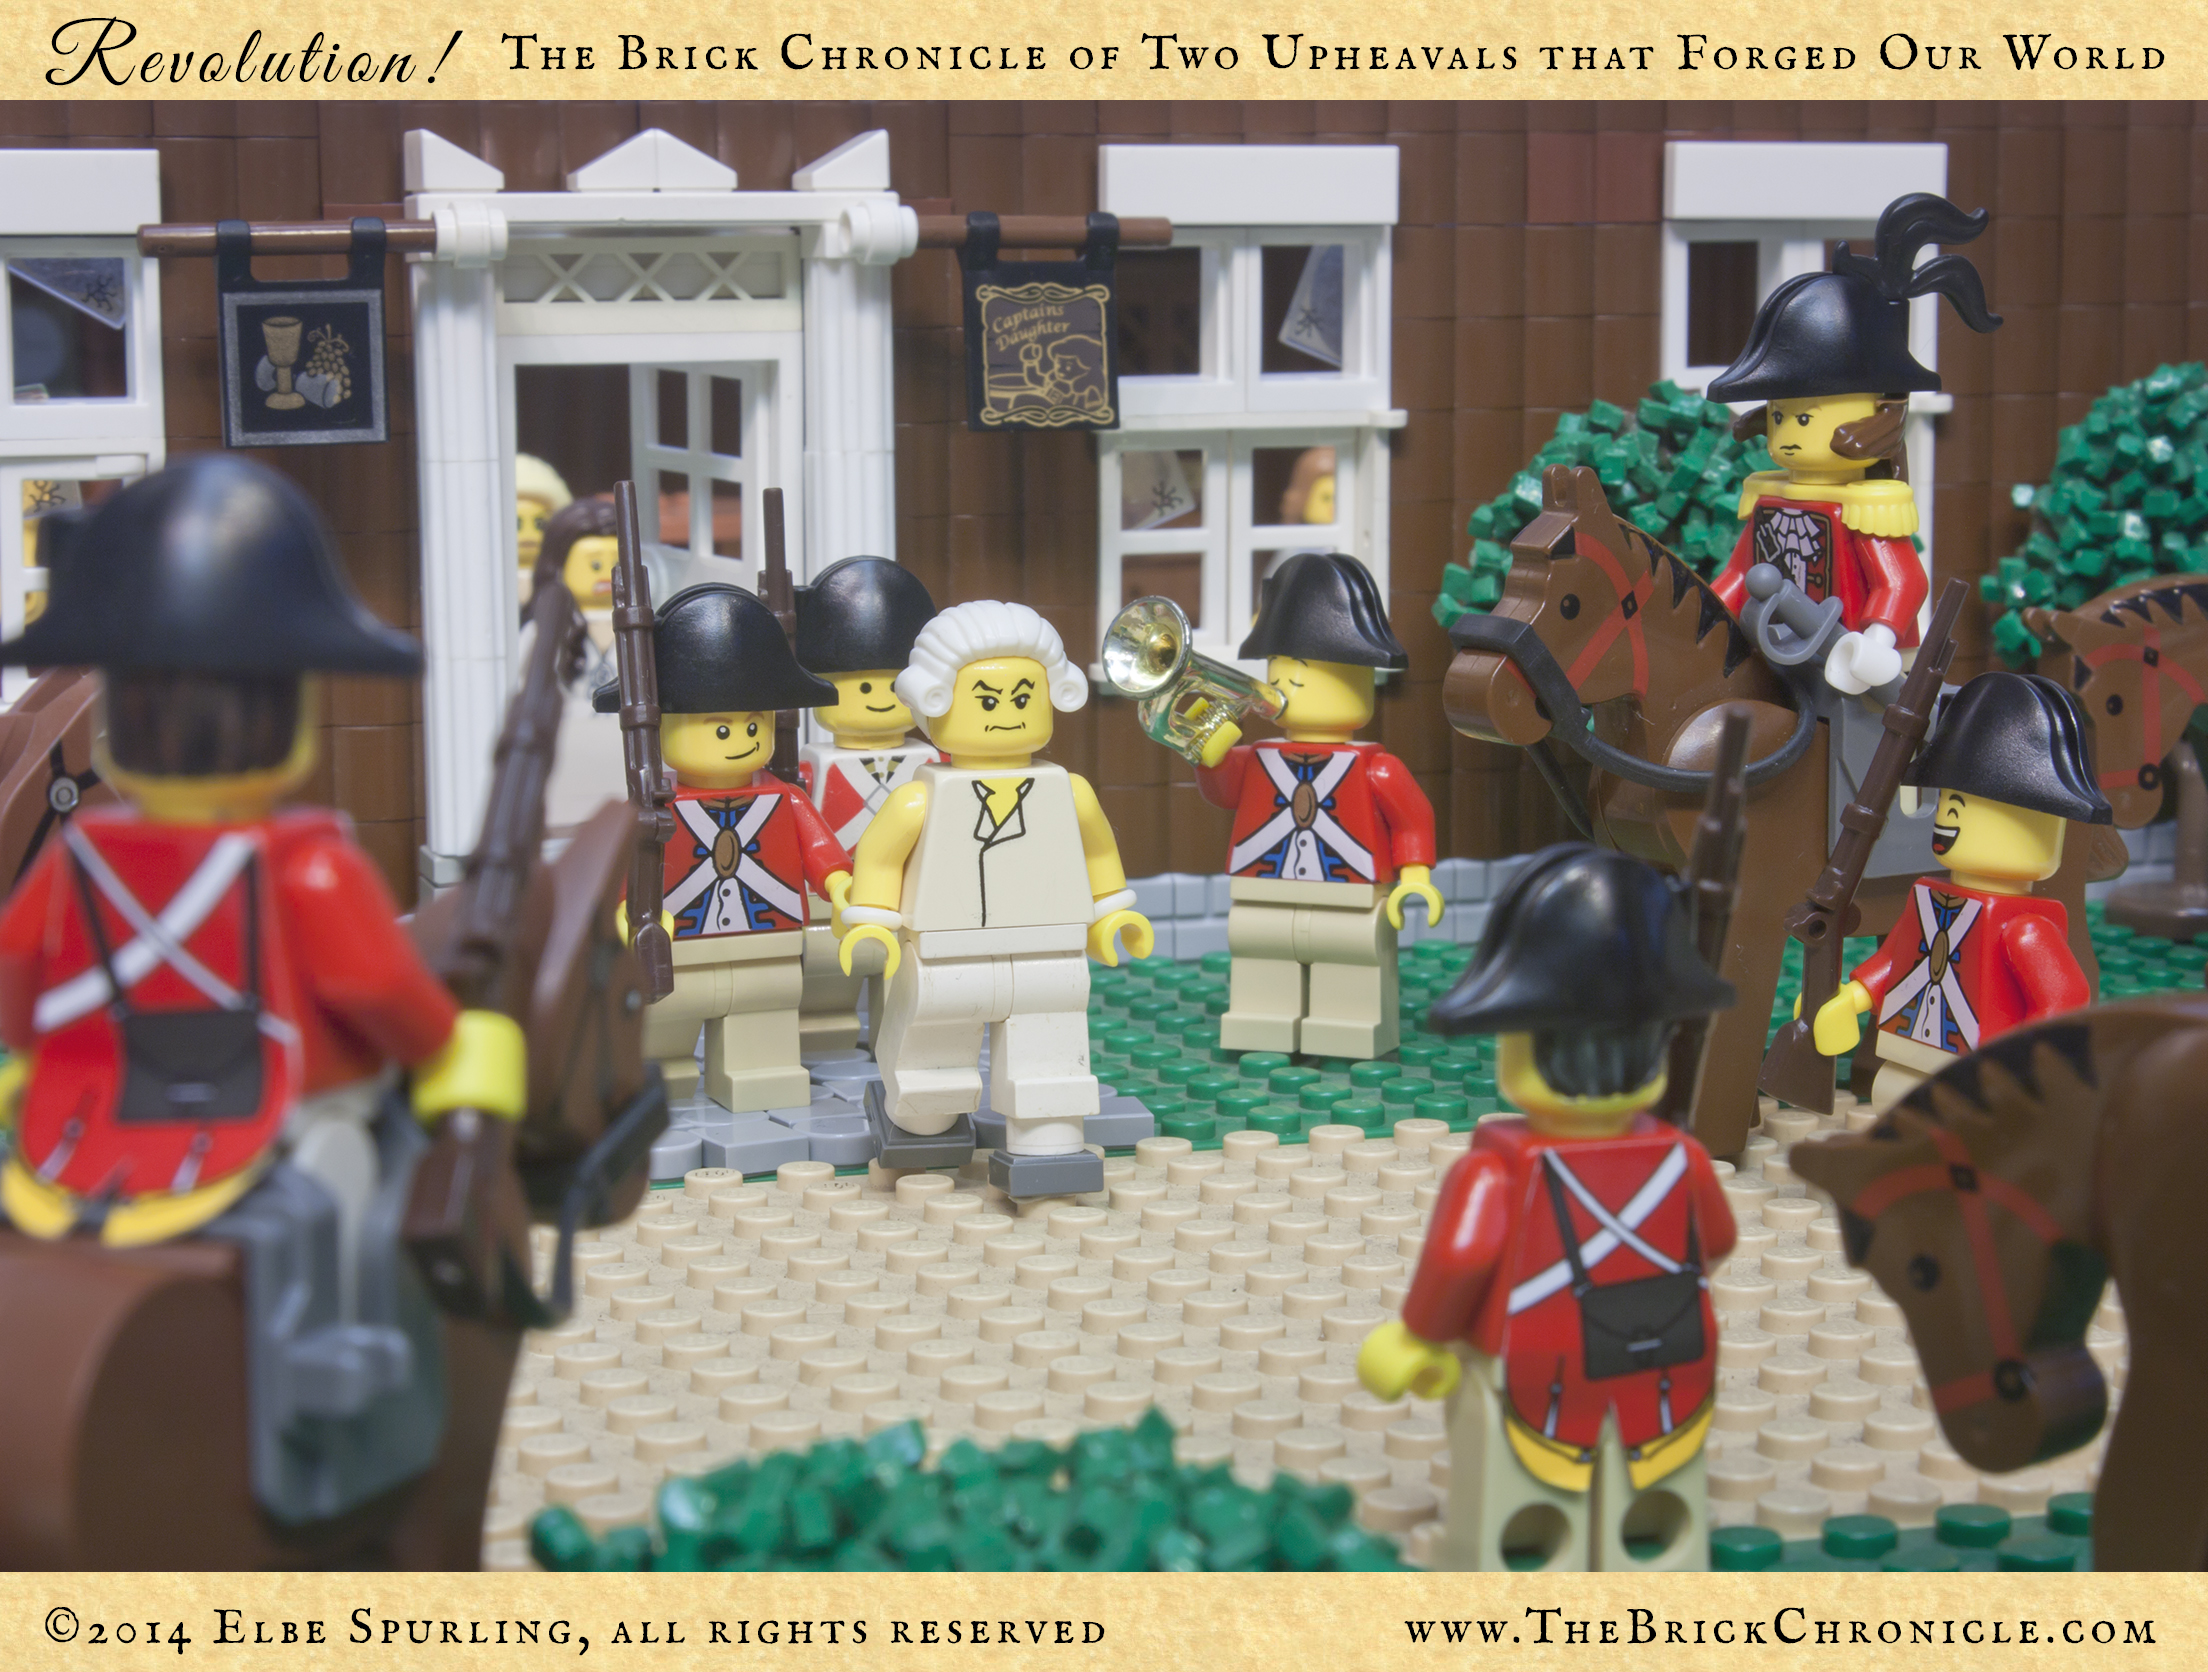 On December 13, Washington’s second in command, General Charles Lee, chose to spend the night at a tavern in Basking Ridge, New Jersey, some three miles away from his troops, enjoying the company of prostitutes. Tipped off to his whereabouts by local loyalists, a British mounted patrol, led by Banastre Tarleton, surrounded the tavern, fired through the windows, and threatened to burn it to the ground. Lee surrendered in his dressing gown amid derisory cheers and a mocking trumpet blast from his British captors.